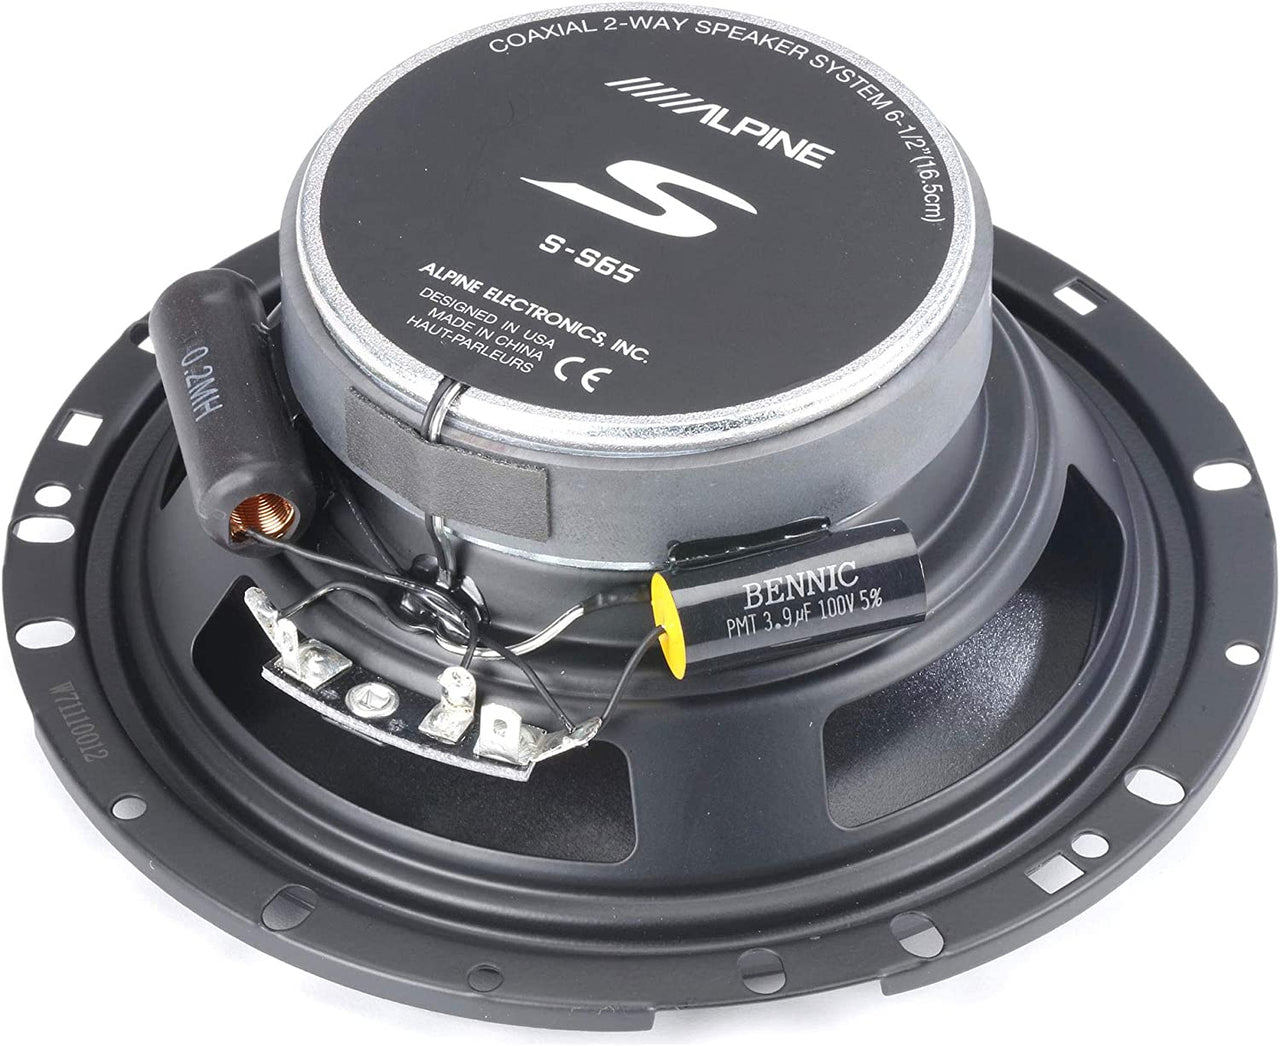 Alpine S-S65 6.5" Speaker Package With Speaker Adapter and Harness For Select Honda and Acura Vehicles